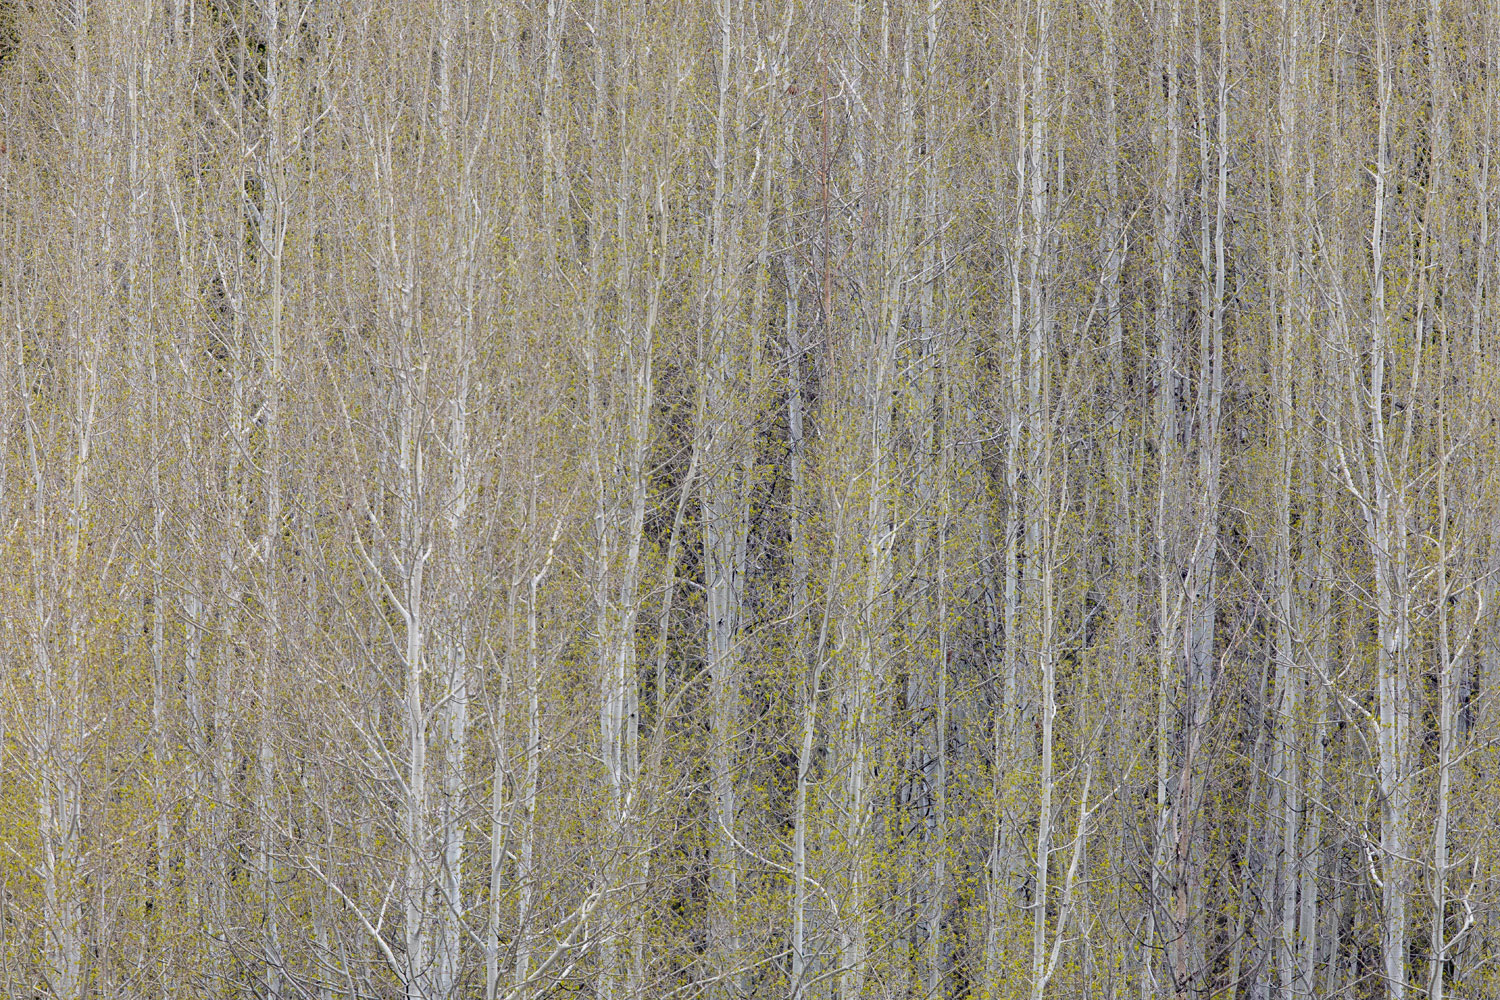 The first emerging green of spring in a thick aspen grove.